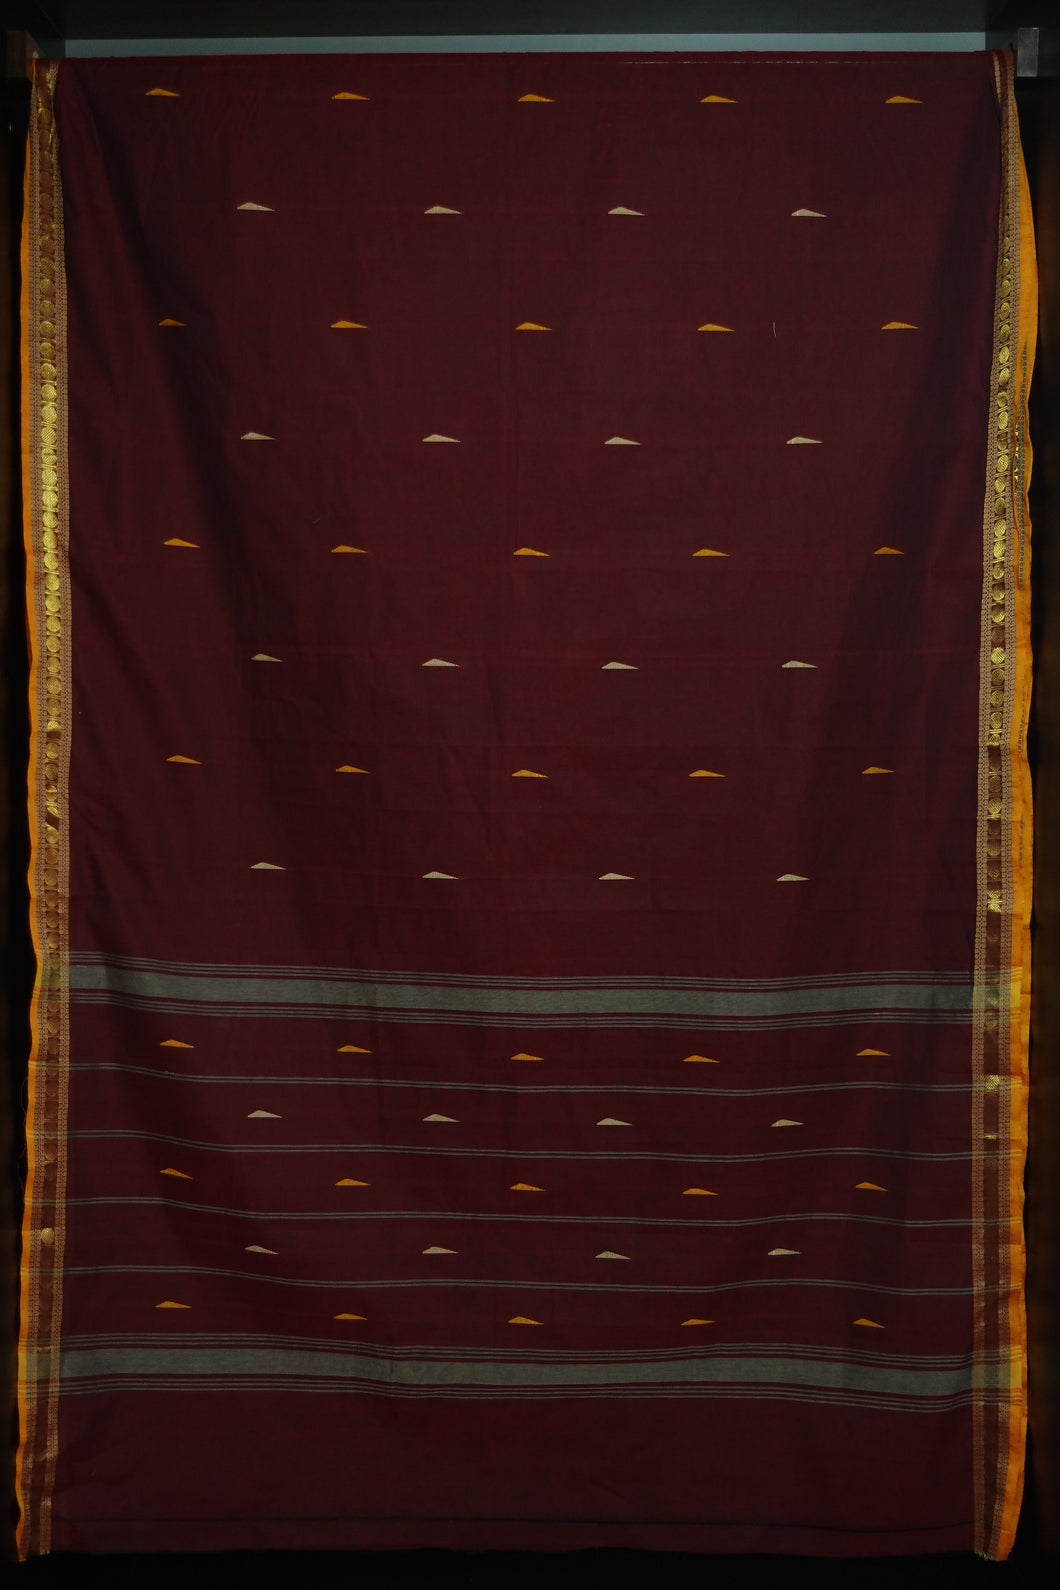 Kanchi Cotton Sarees With Traditional Border Designs | VR212